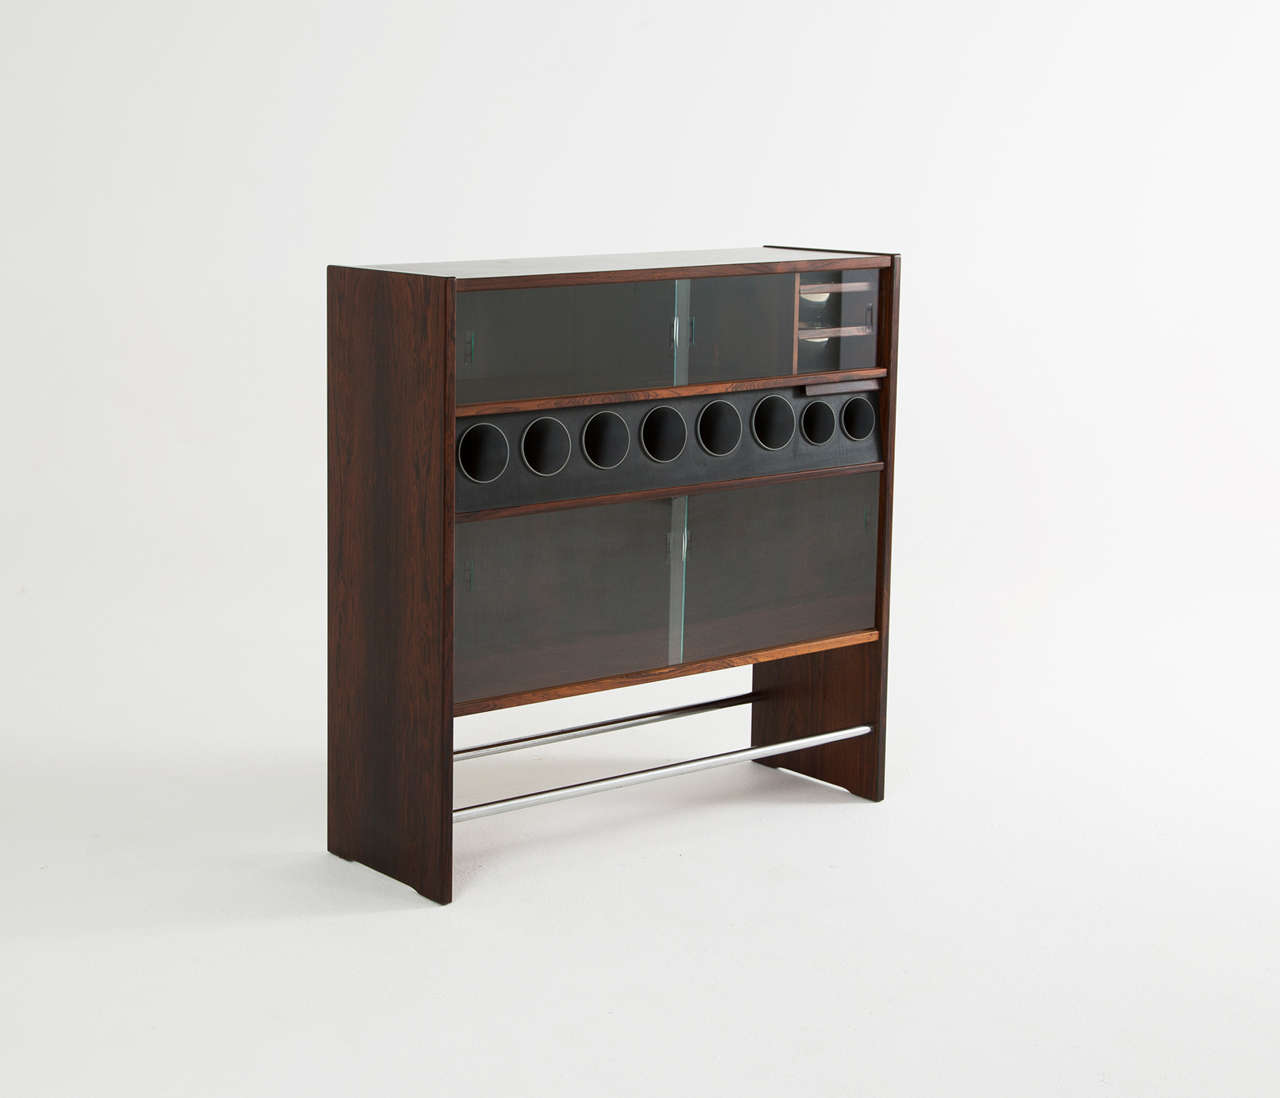 Elegant Danish dry bar, 1960s. The bar shows a lot of interesting lines and stunning details. The front is completely covered in a large piece of rosewood veneer which is in very nice contrast with the chrome footrest. The bar is equipped with a ice